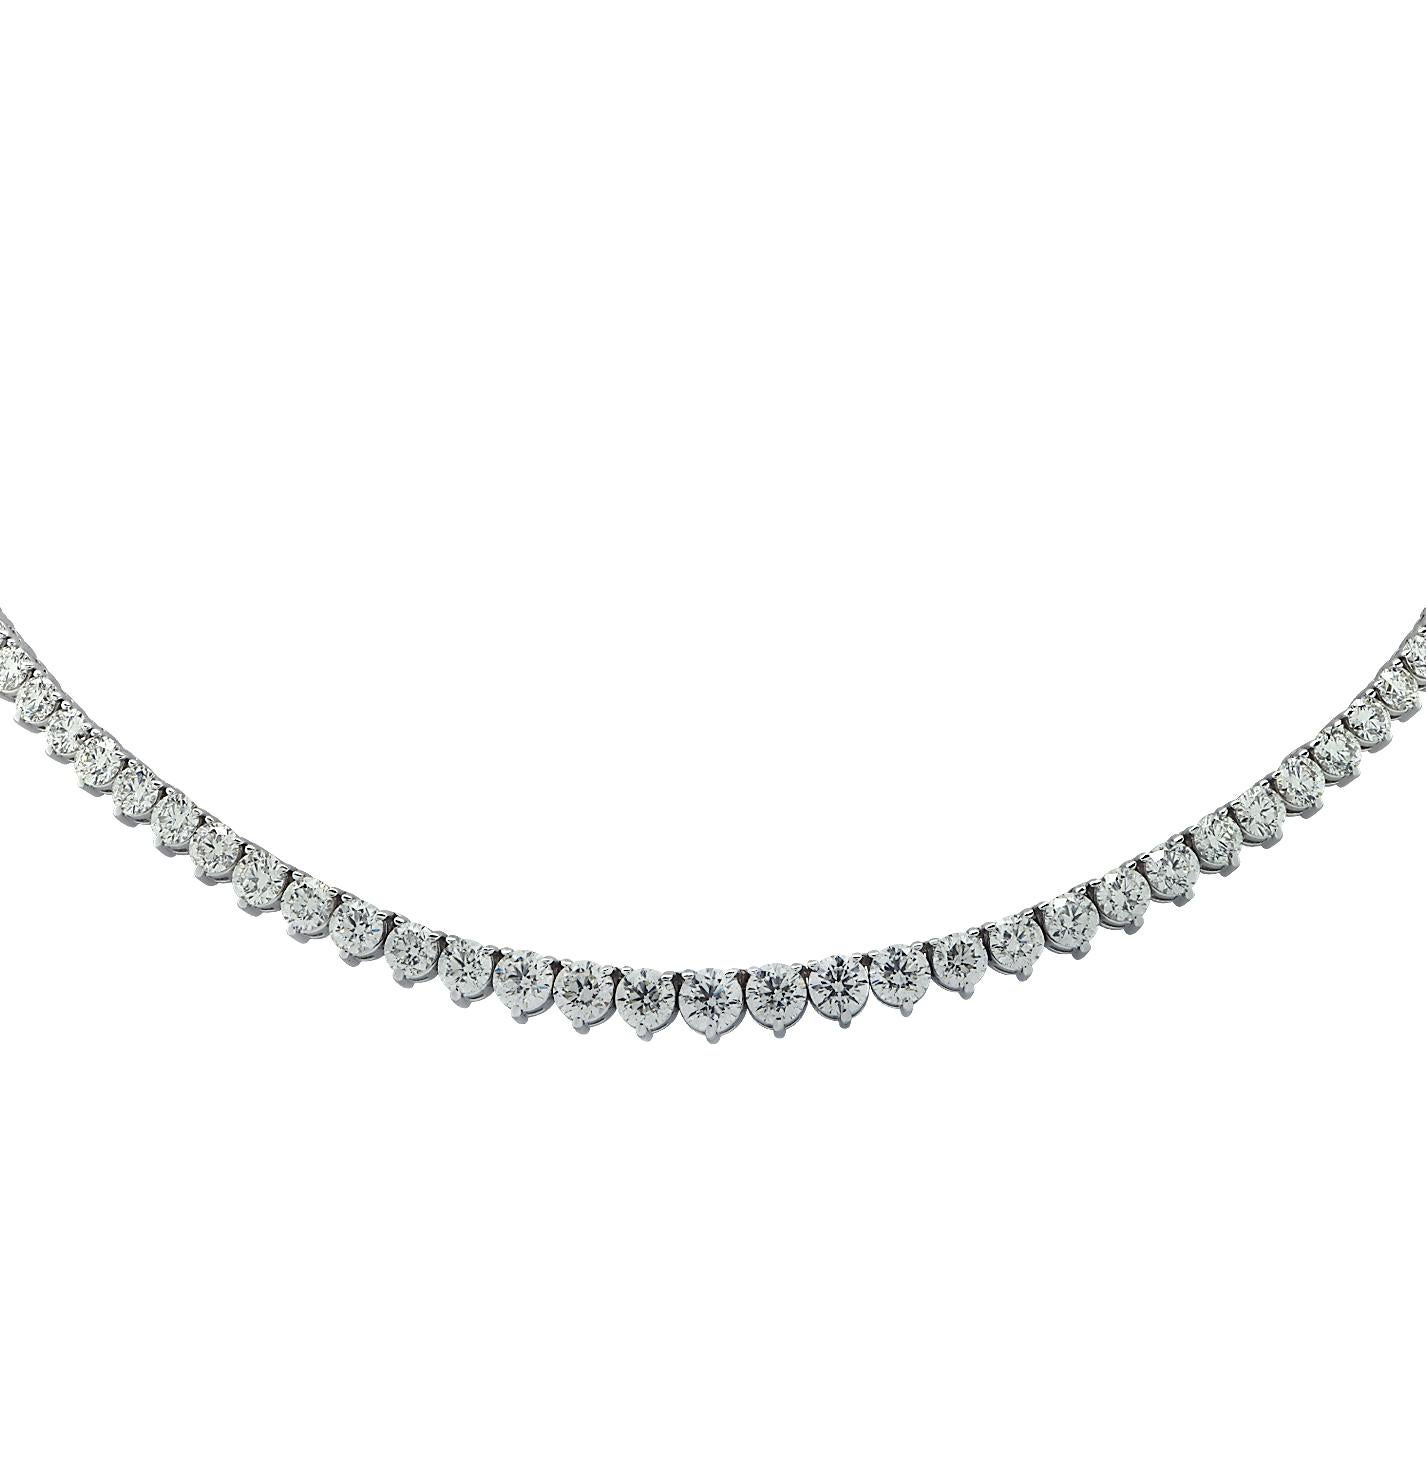 Vivid Diamonds diamond Riviera Necklace crafted in 14 Karat White Gold, showcasing 161 round brilliant cut diamonds weighing 11.02 carats, G-H color, SI clarity. Each diamond was carefully selected, perfectly matched and set in a seamless sea of